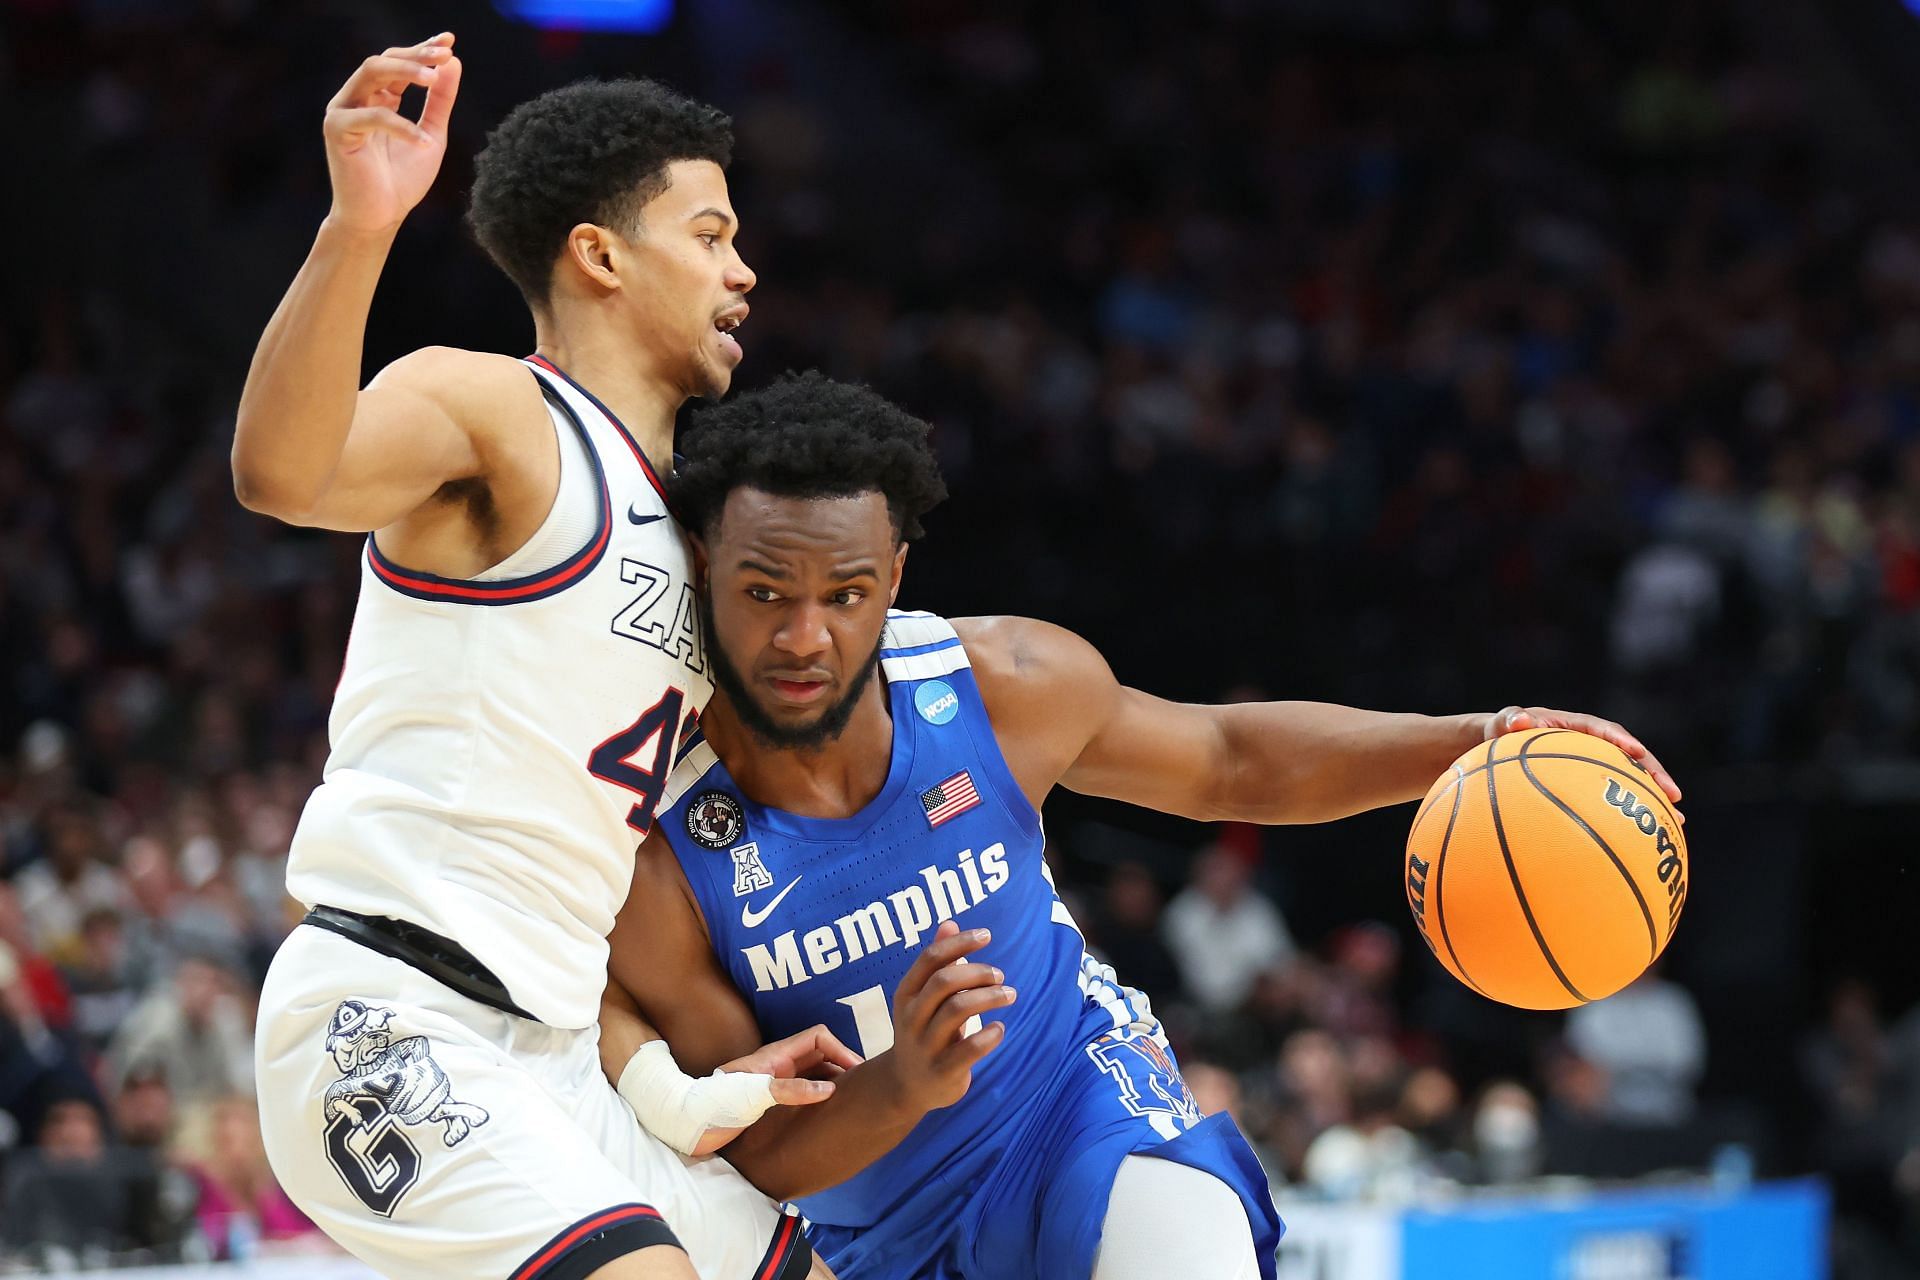 Memphis and Gonzaga played a challenging, physical game to try to reach the Sweet 16.